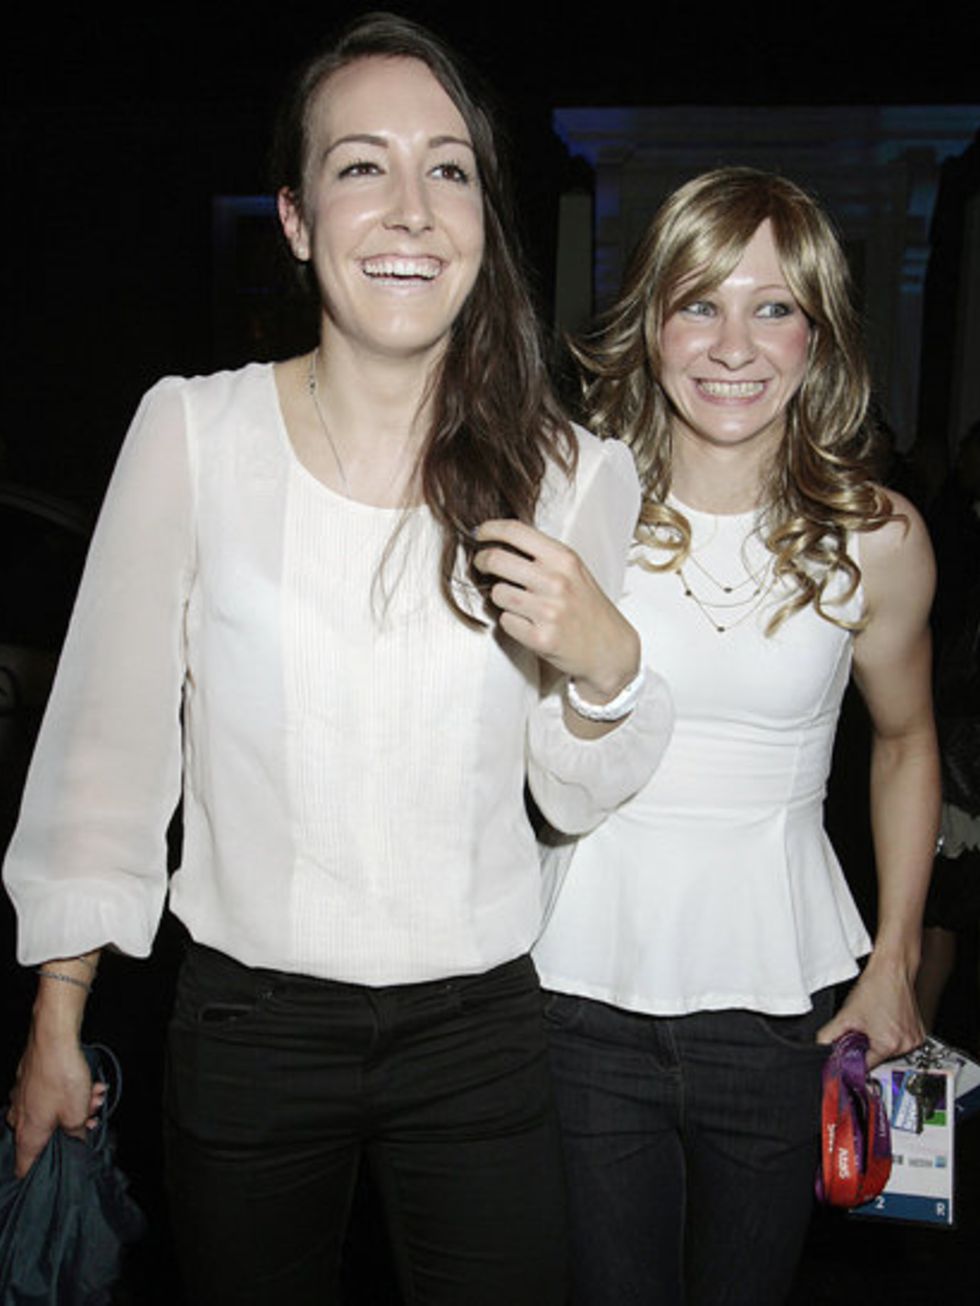 <p>Gold medal cyclists Dani King and Joanna Rowsell matched in white as they partied at Mahiki to celebrate their Olympic success in London.</p>